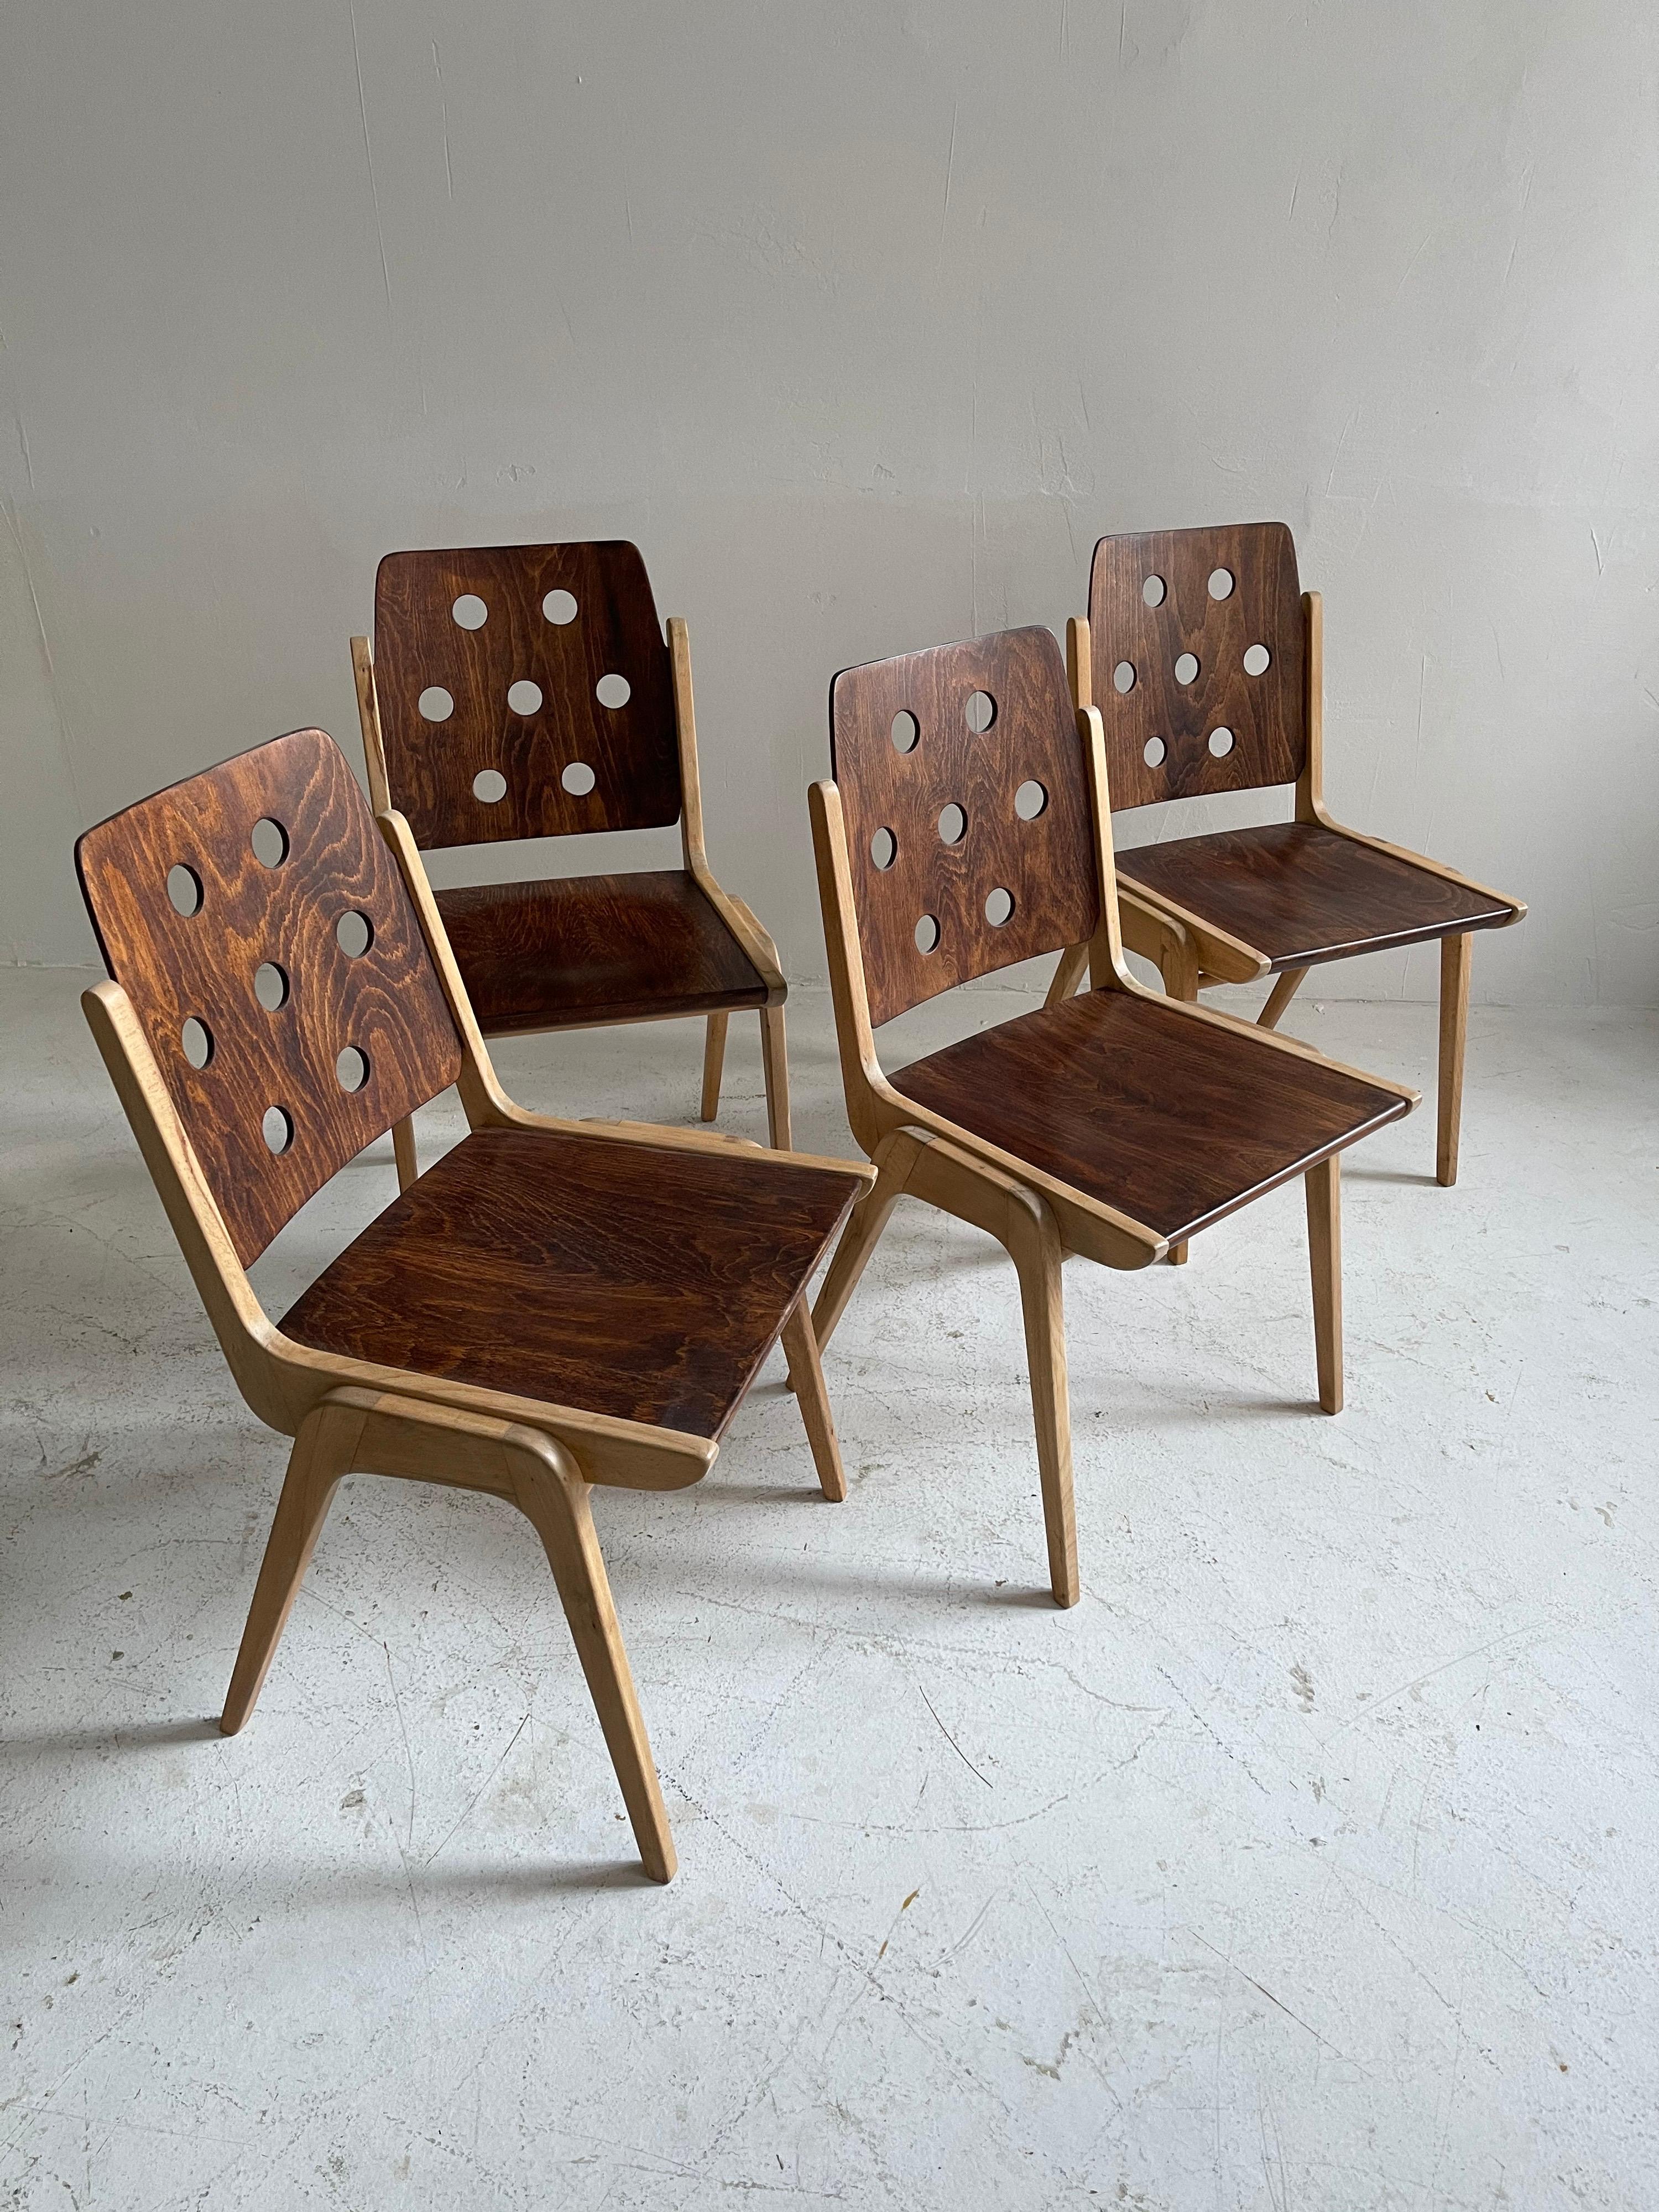 Beech Franz Schuster Model 'Maestro' Dining Room Chairs & Stools, Austria, 1950s For Sale